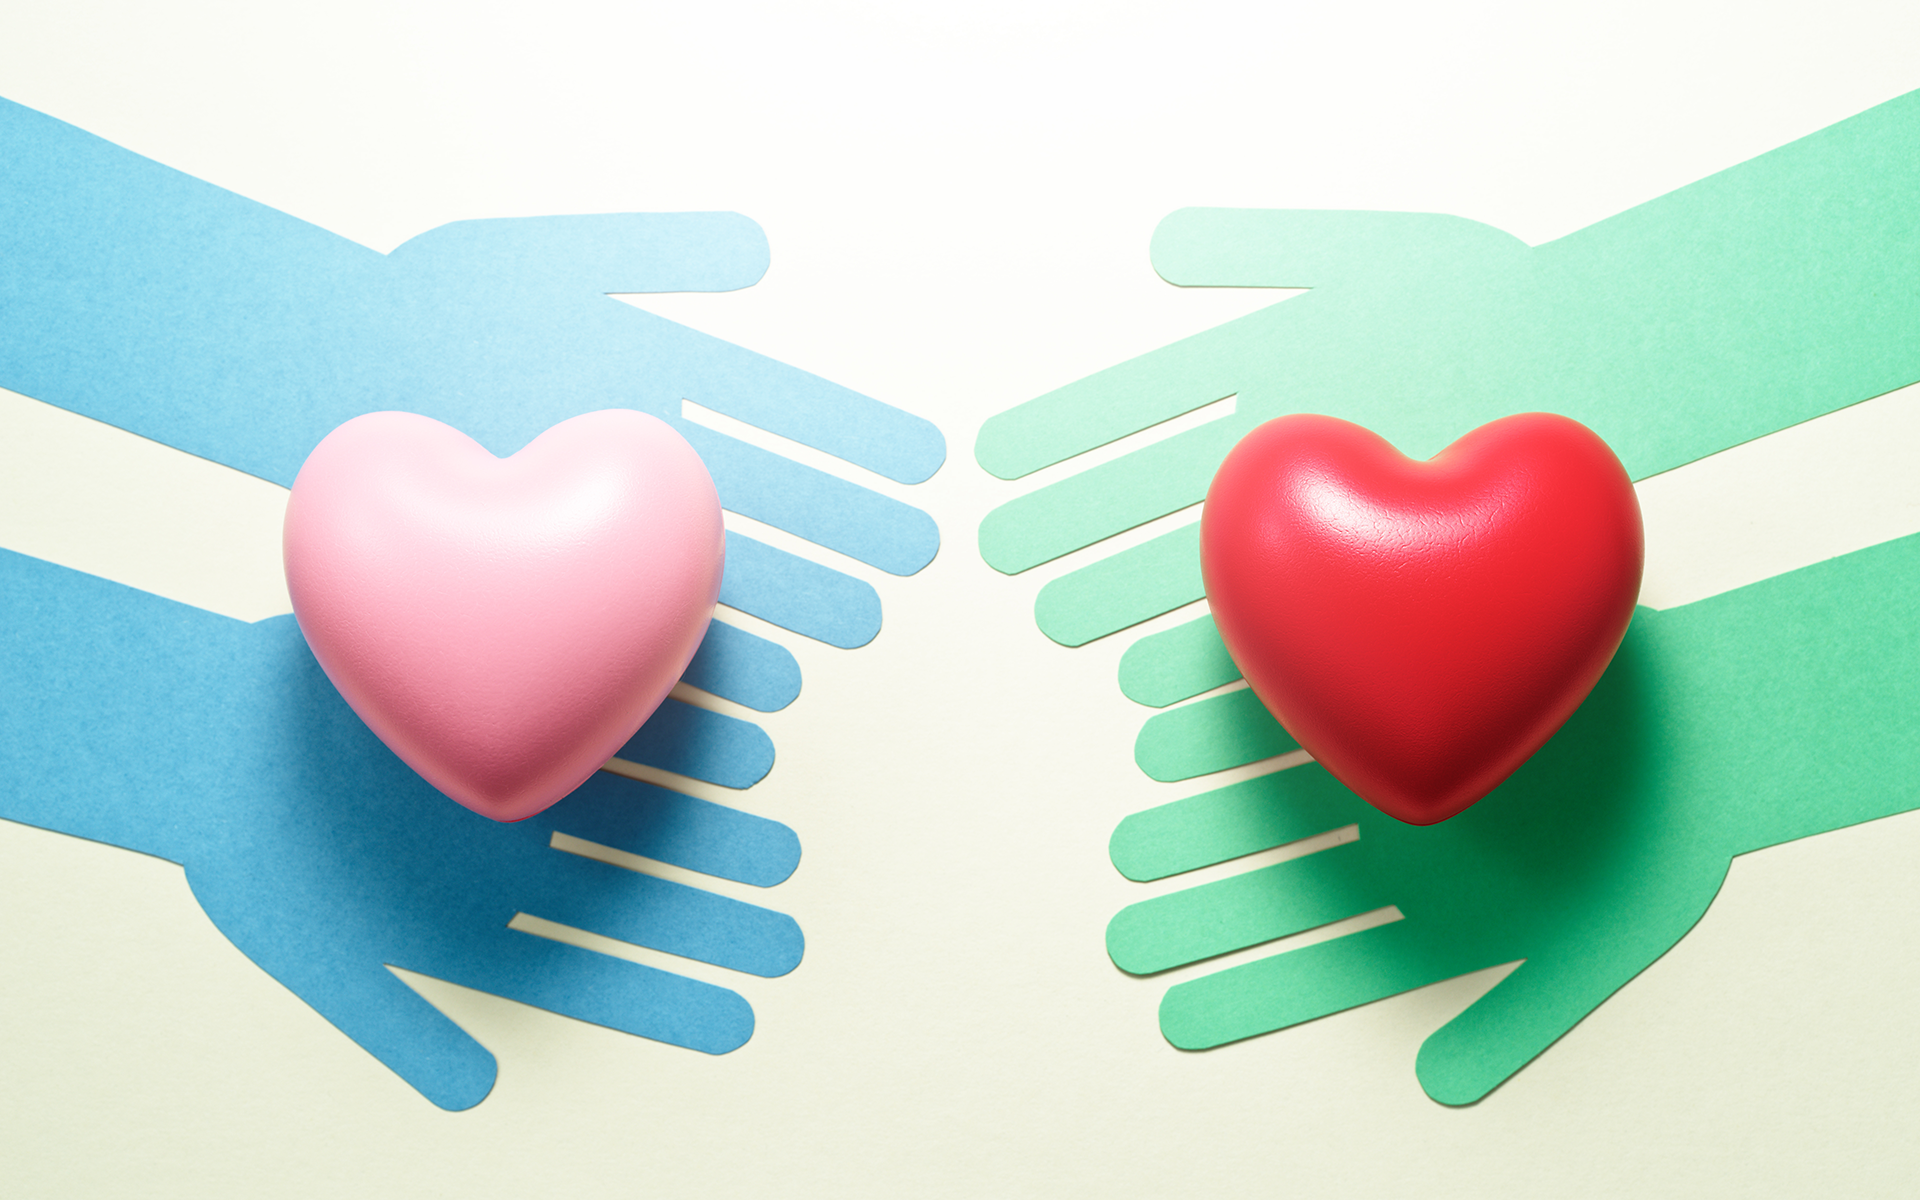 Paper cut outs of two blue hands and two green hands each reaching toward each other with a heart on each set of hands.